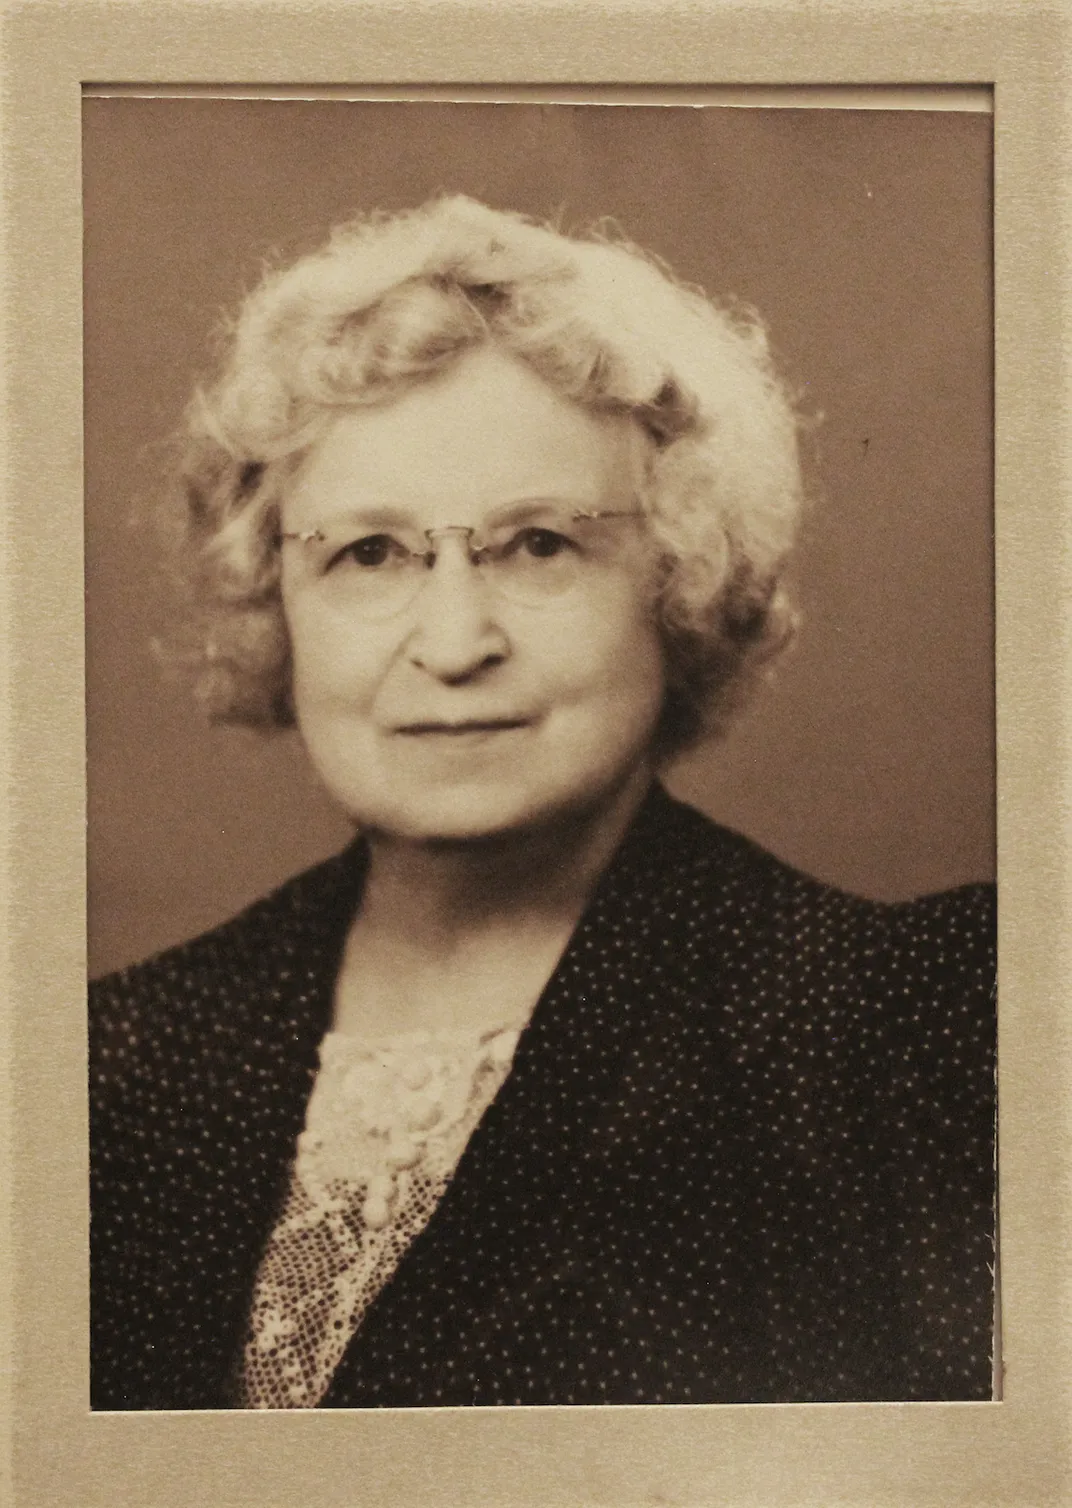 Photo of Mary Ware Dennett in her old age